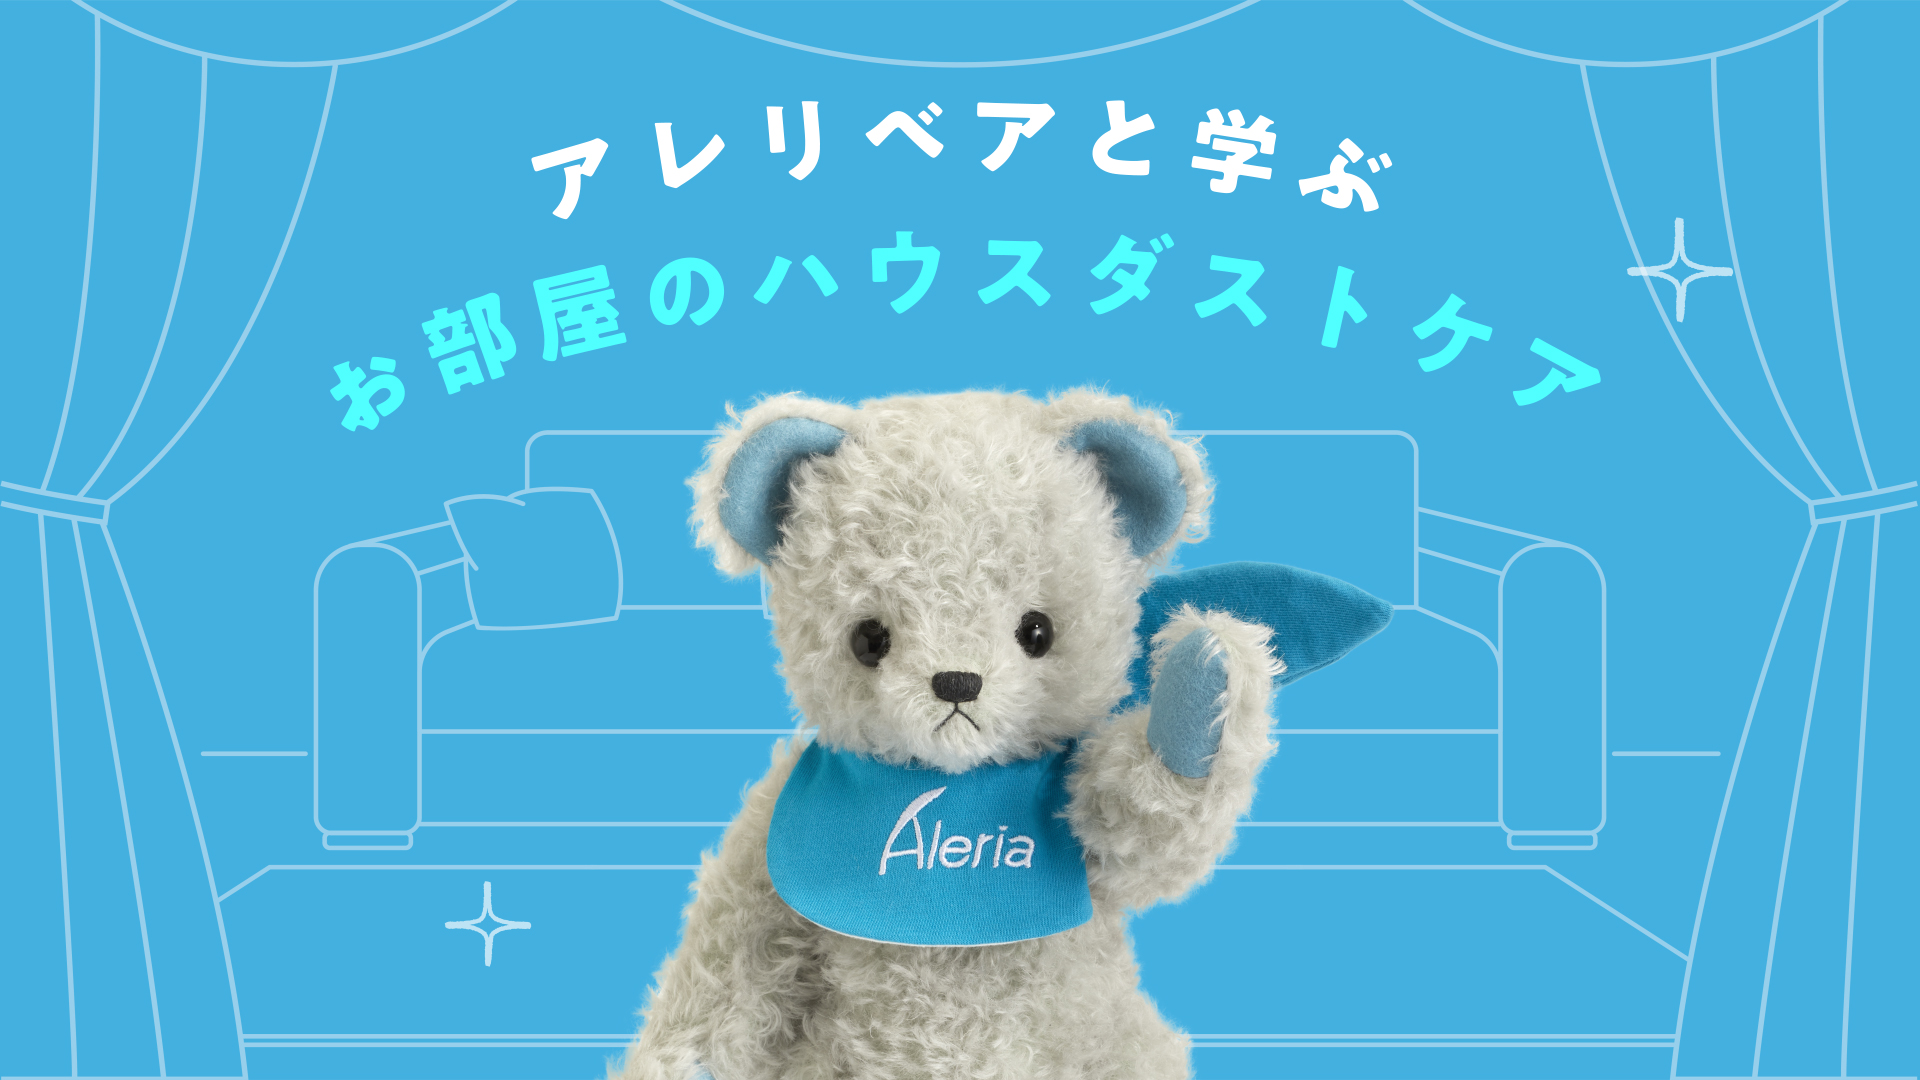 Video for learning about house dust care with the Aleri Bear